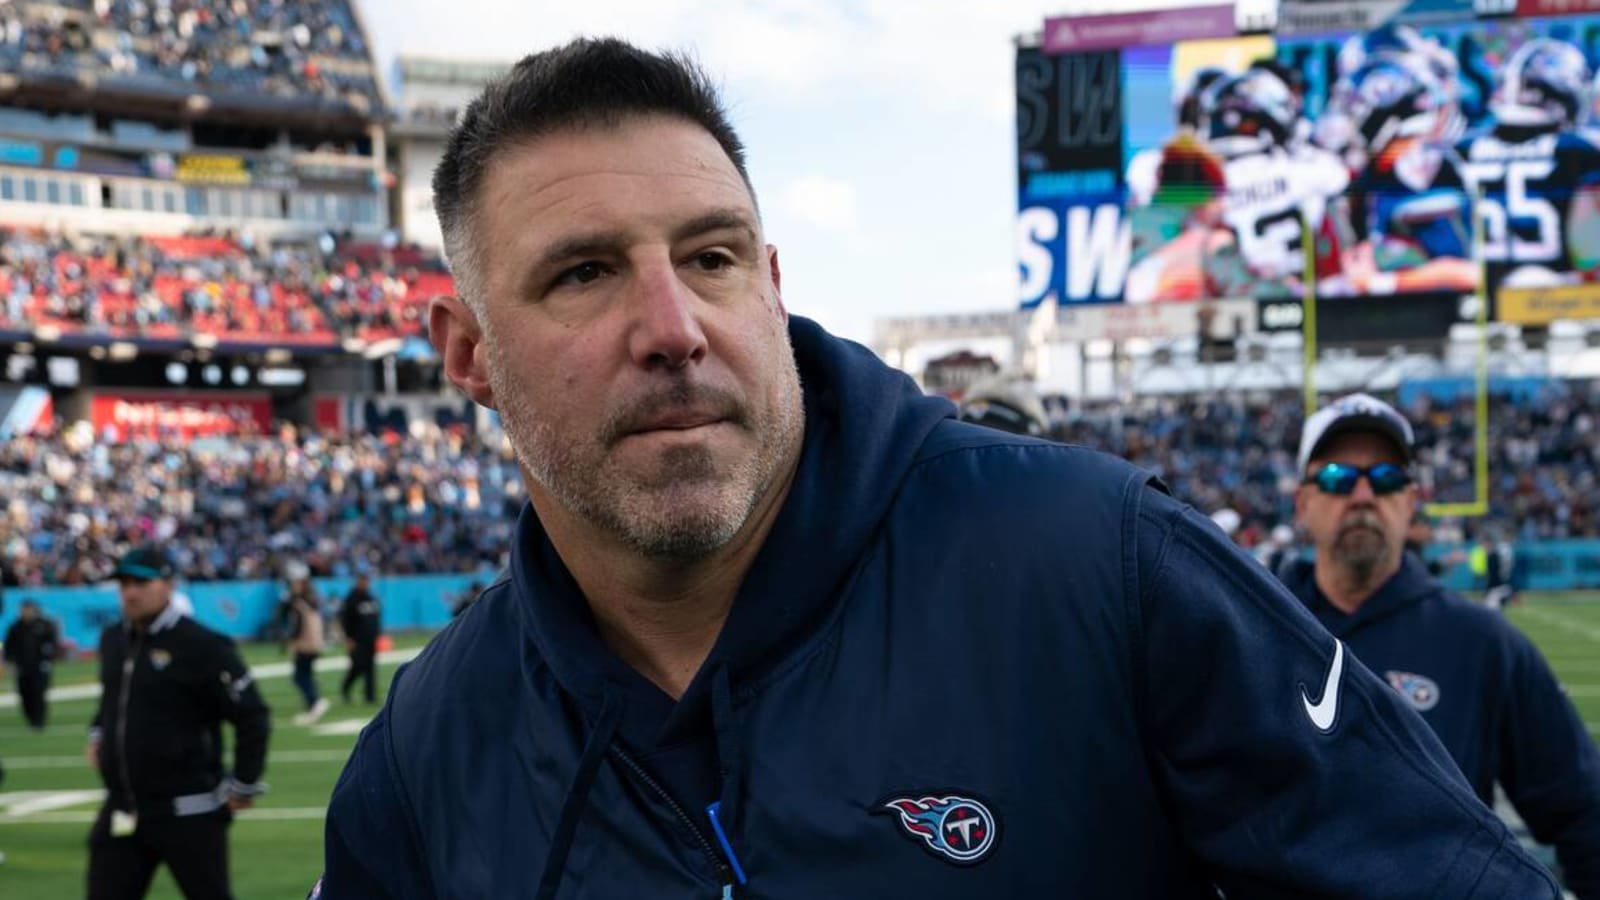 Titans players react to uncertain future of HC Mike Vrabel